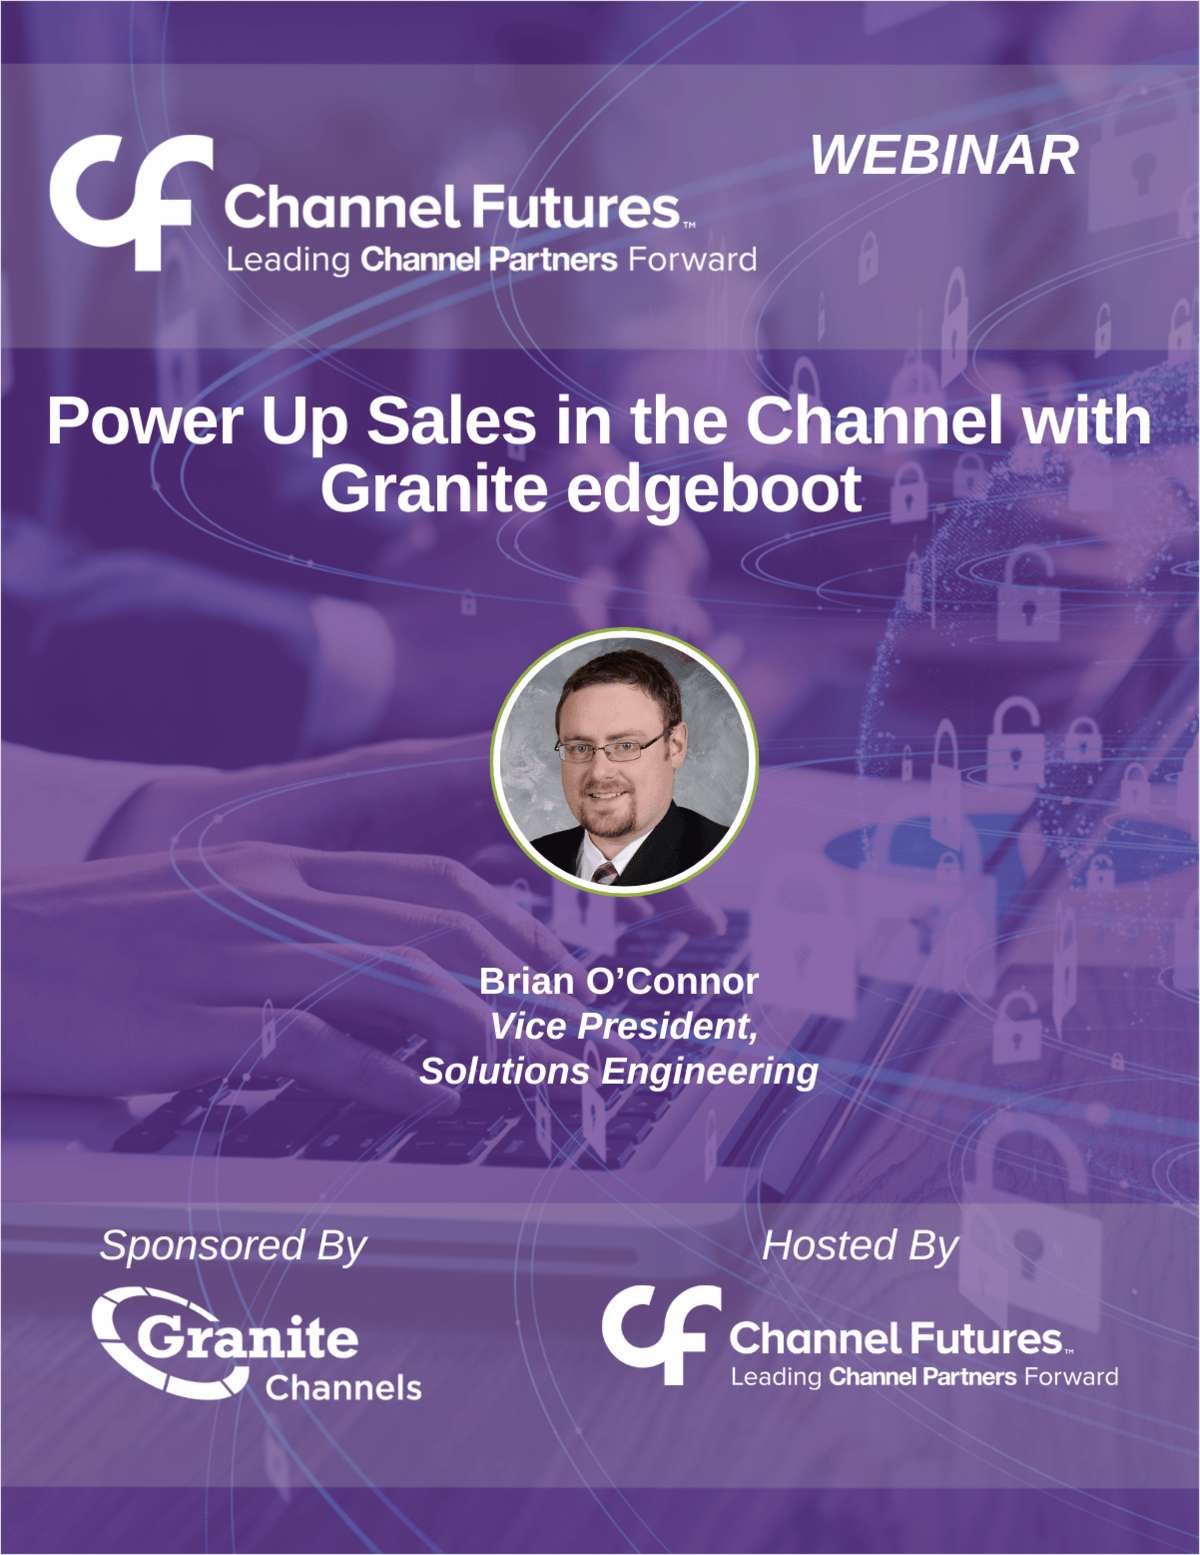 Power Up Sales in the Channel with Granite edgeboot